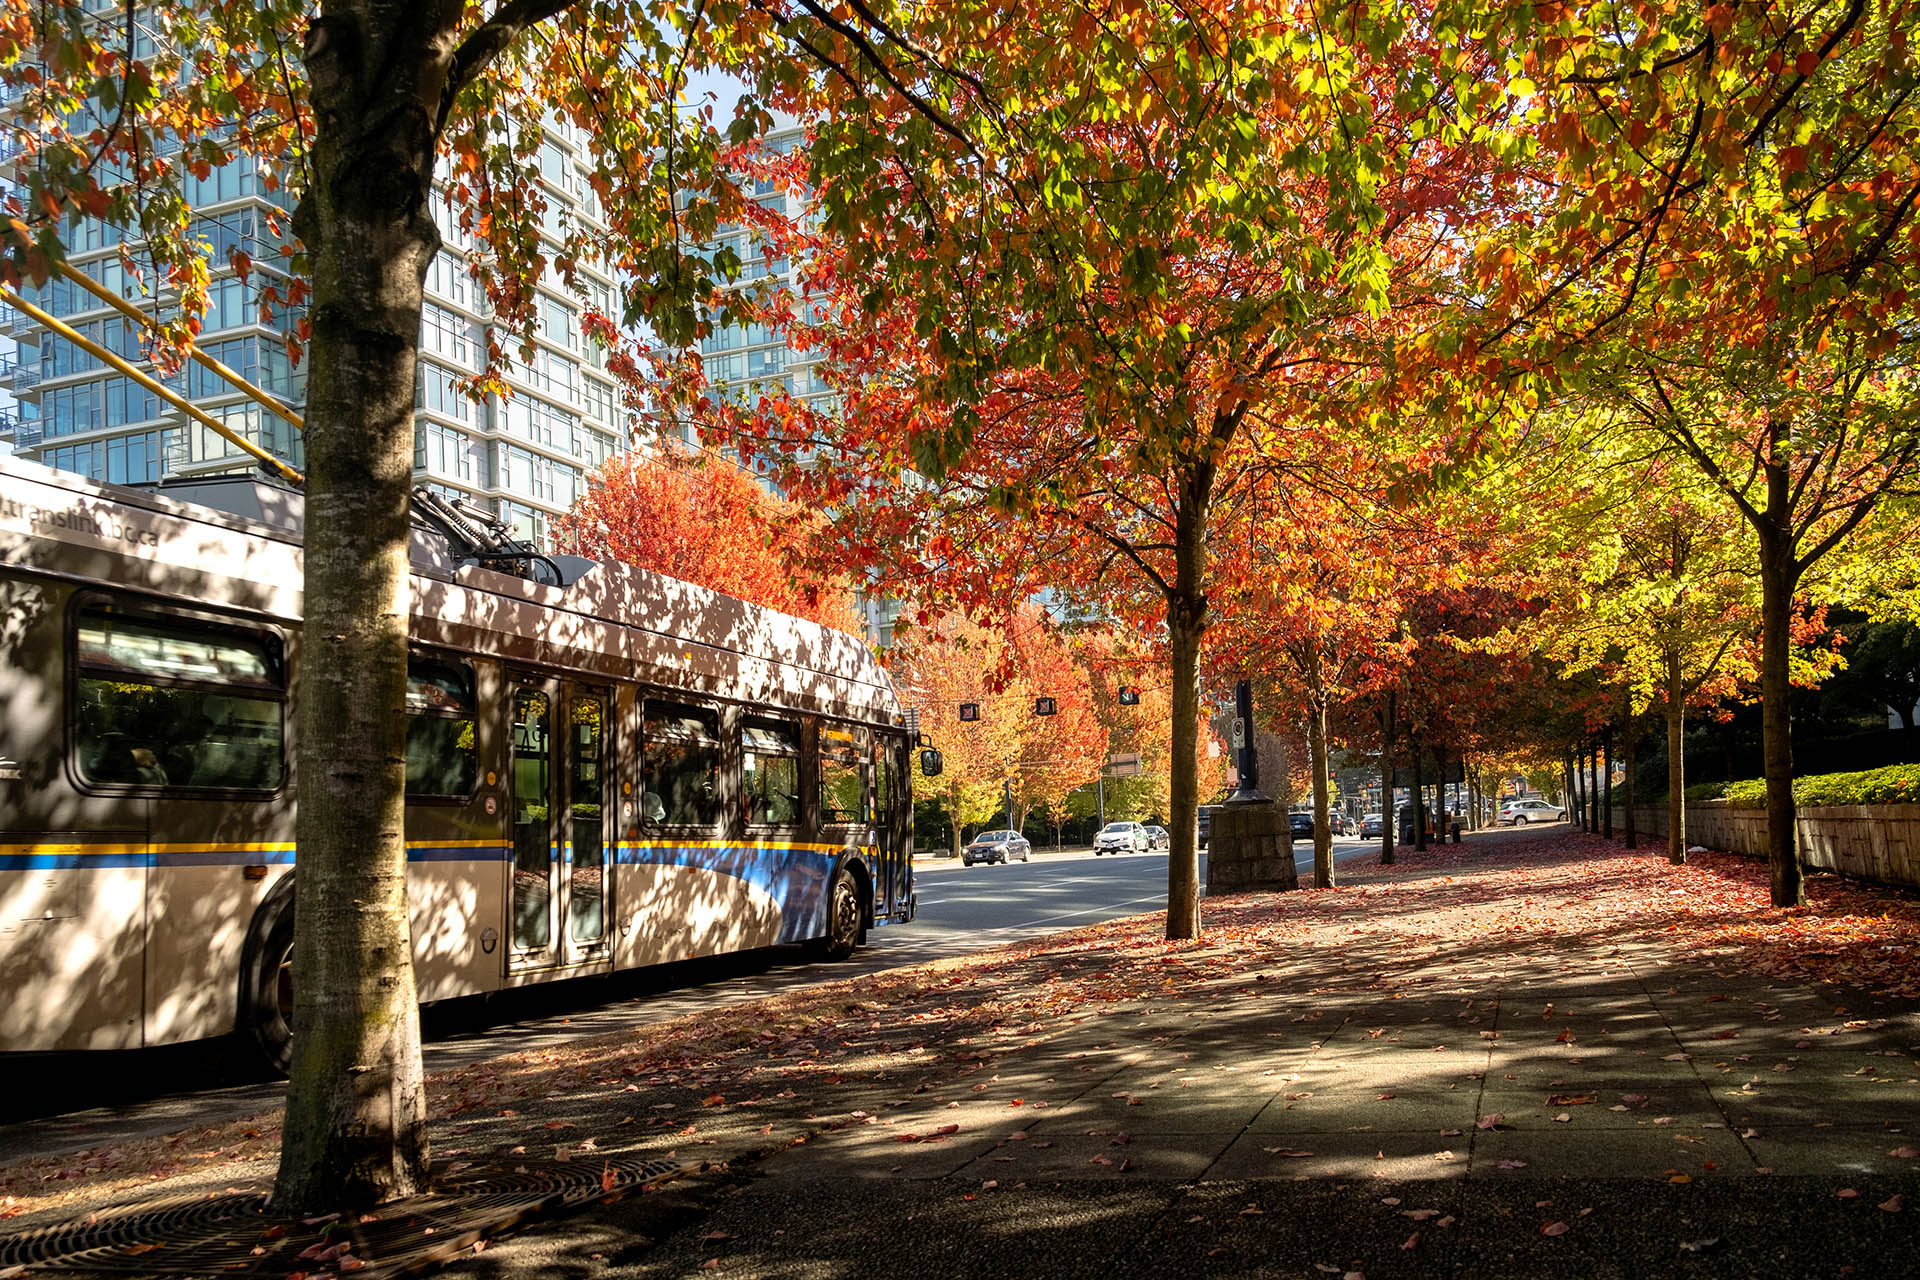 Bus passes by a sidewalk with fall foliage